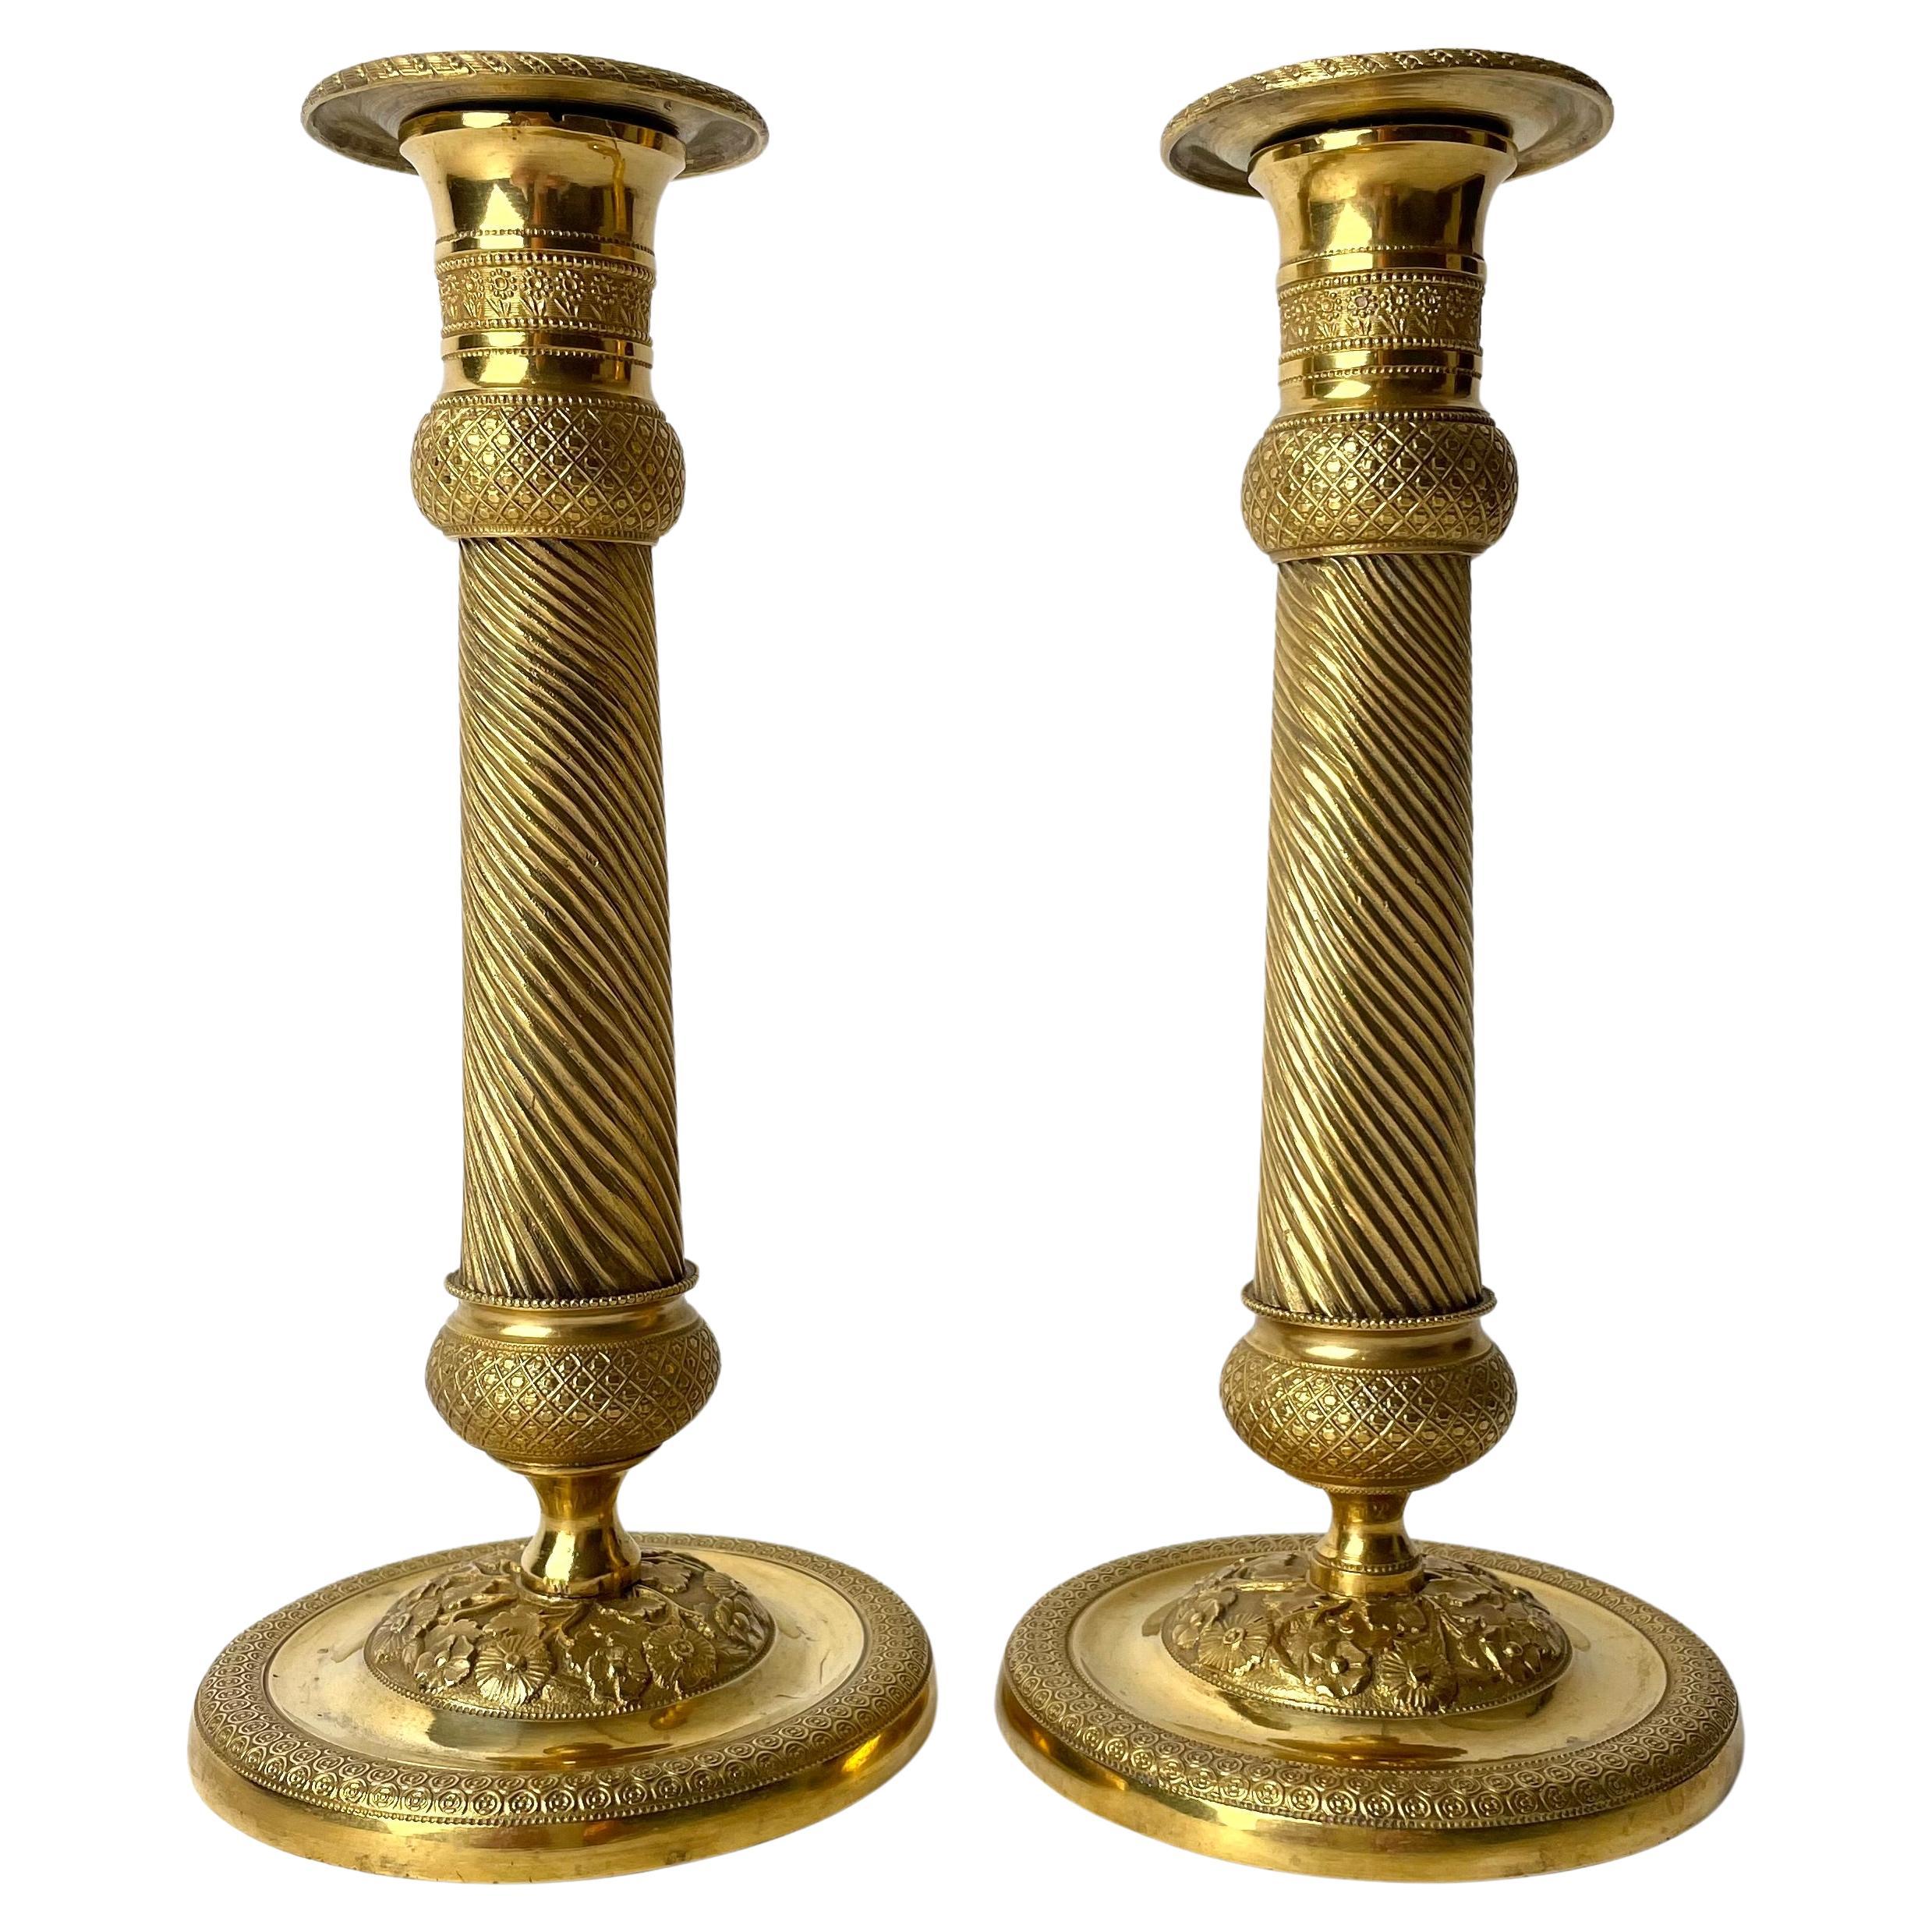 Pair of Gilded French Empire Candlesticks with charming decor from the 1820s For Sale